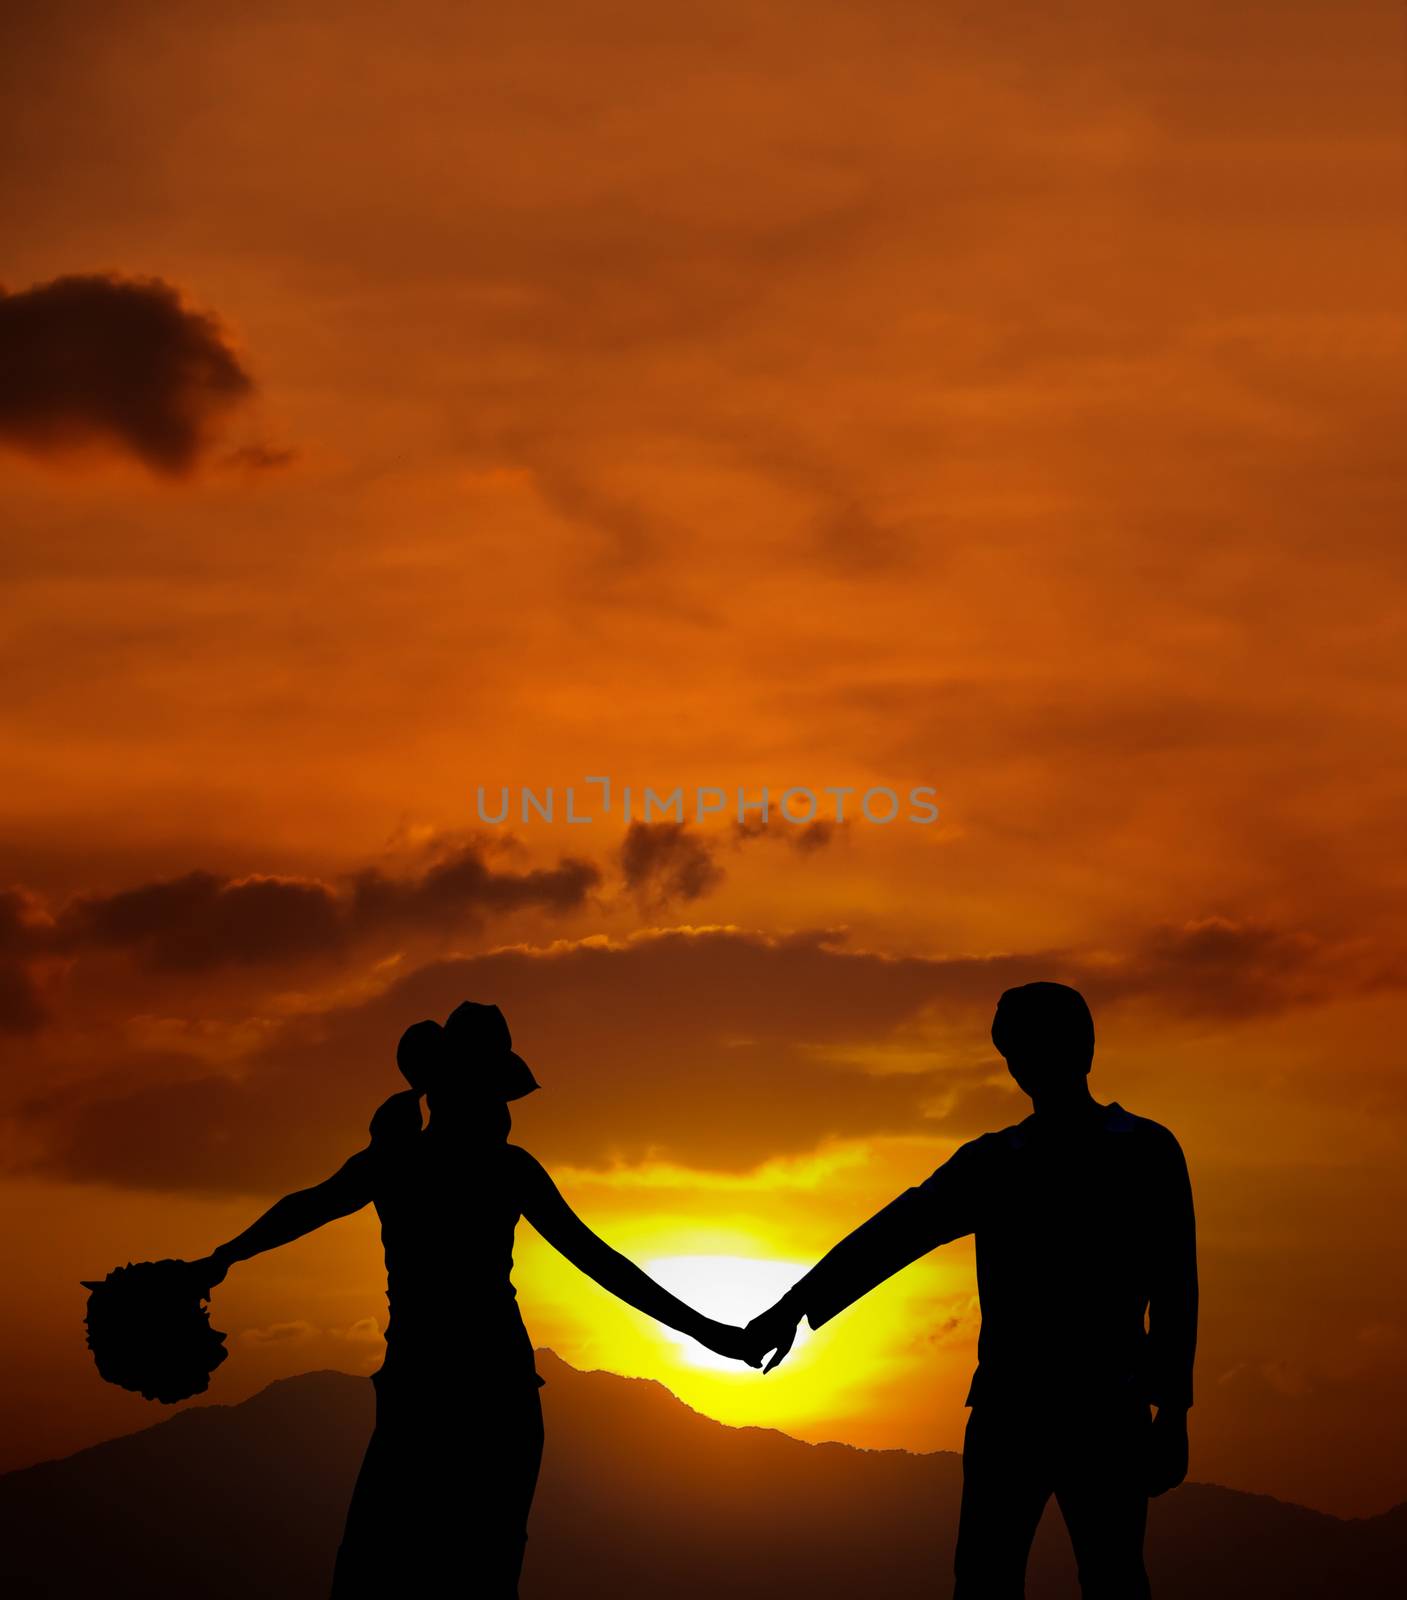 The sunrise of love by Exsodus